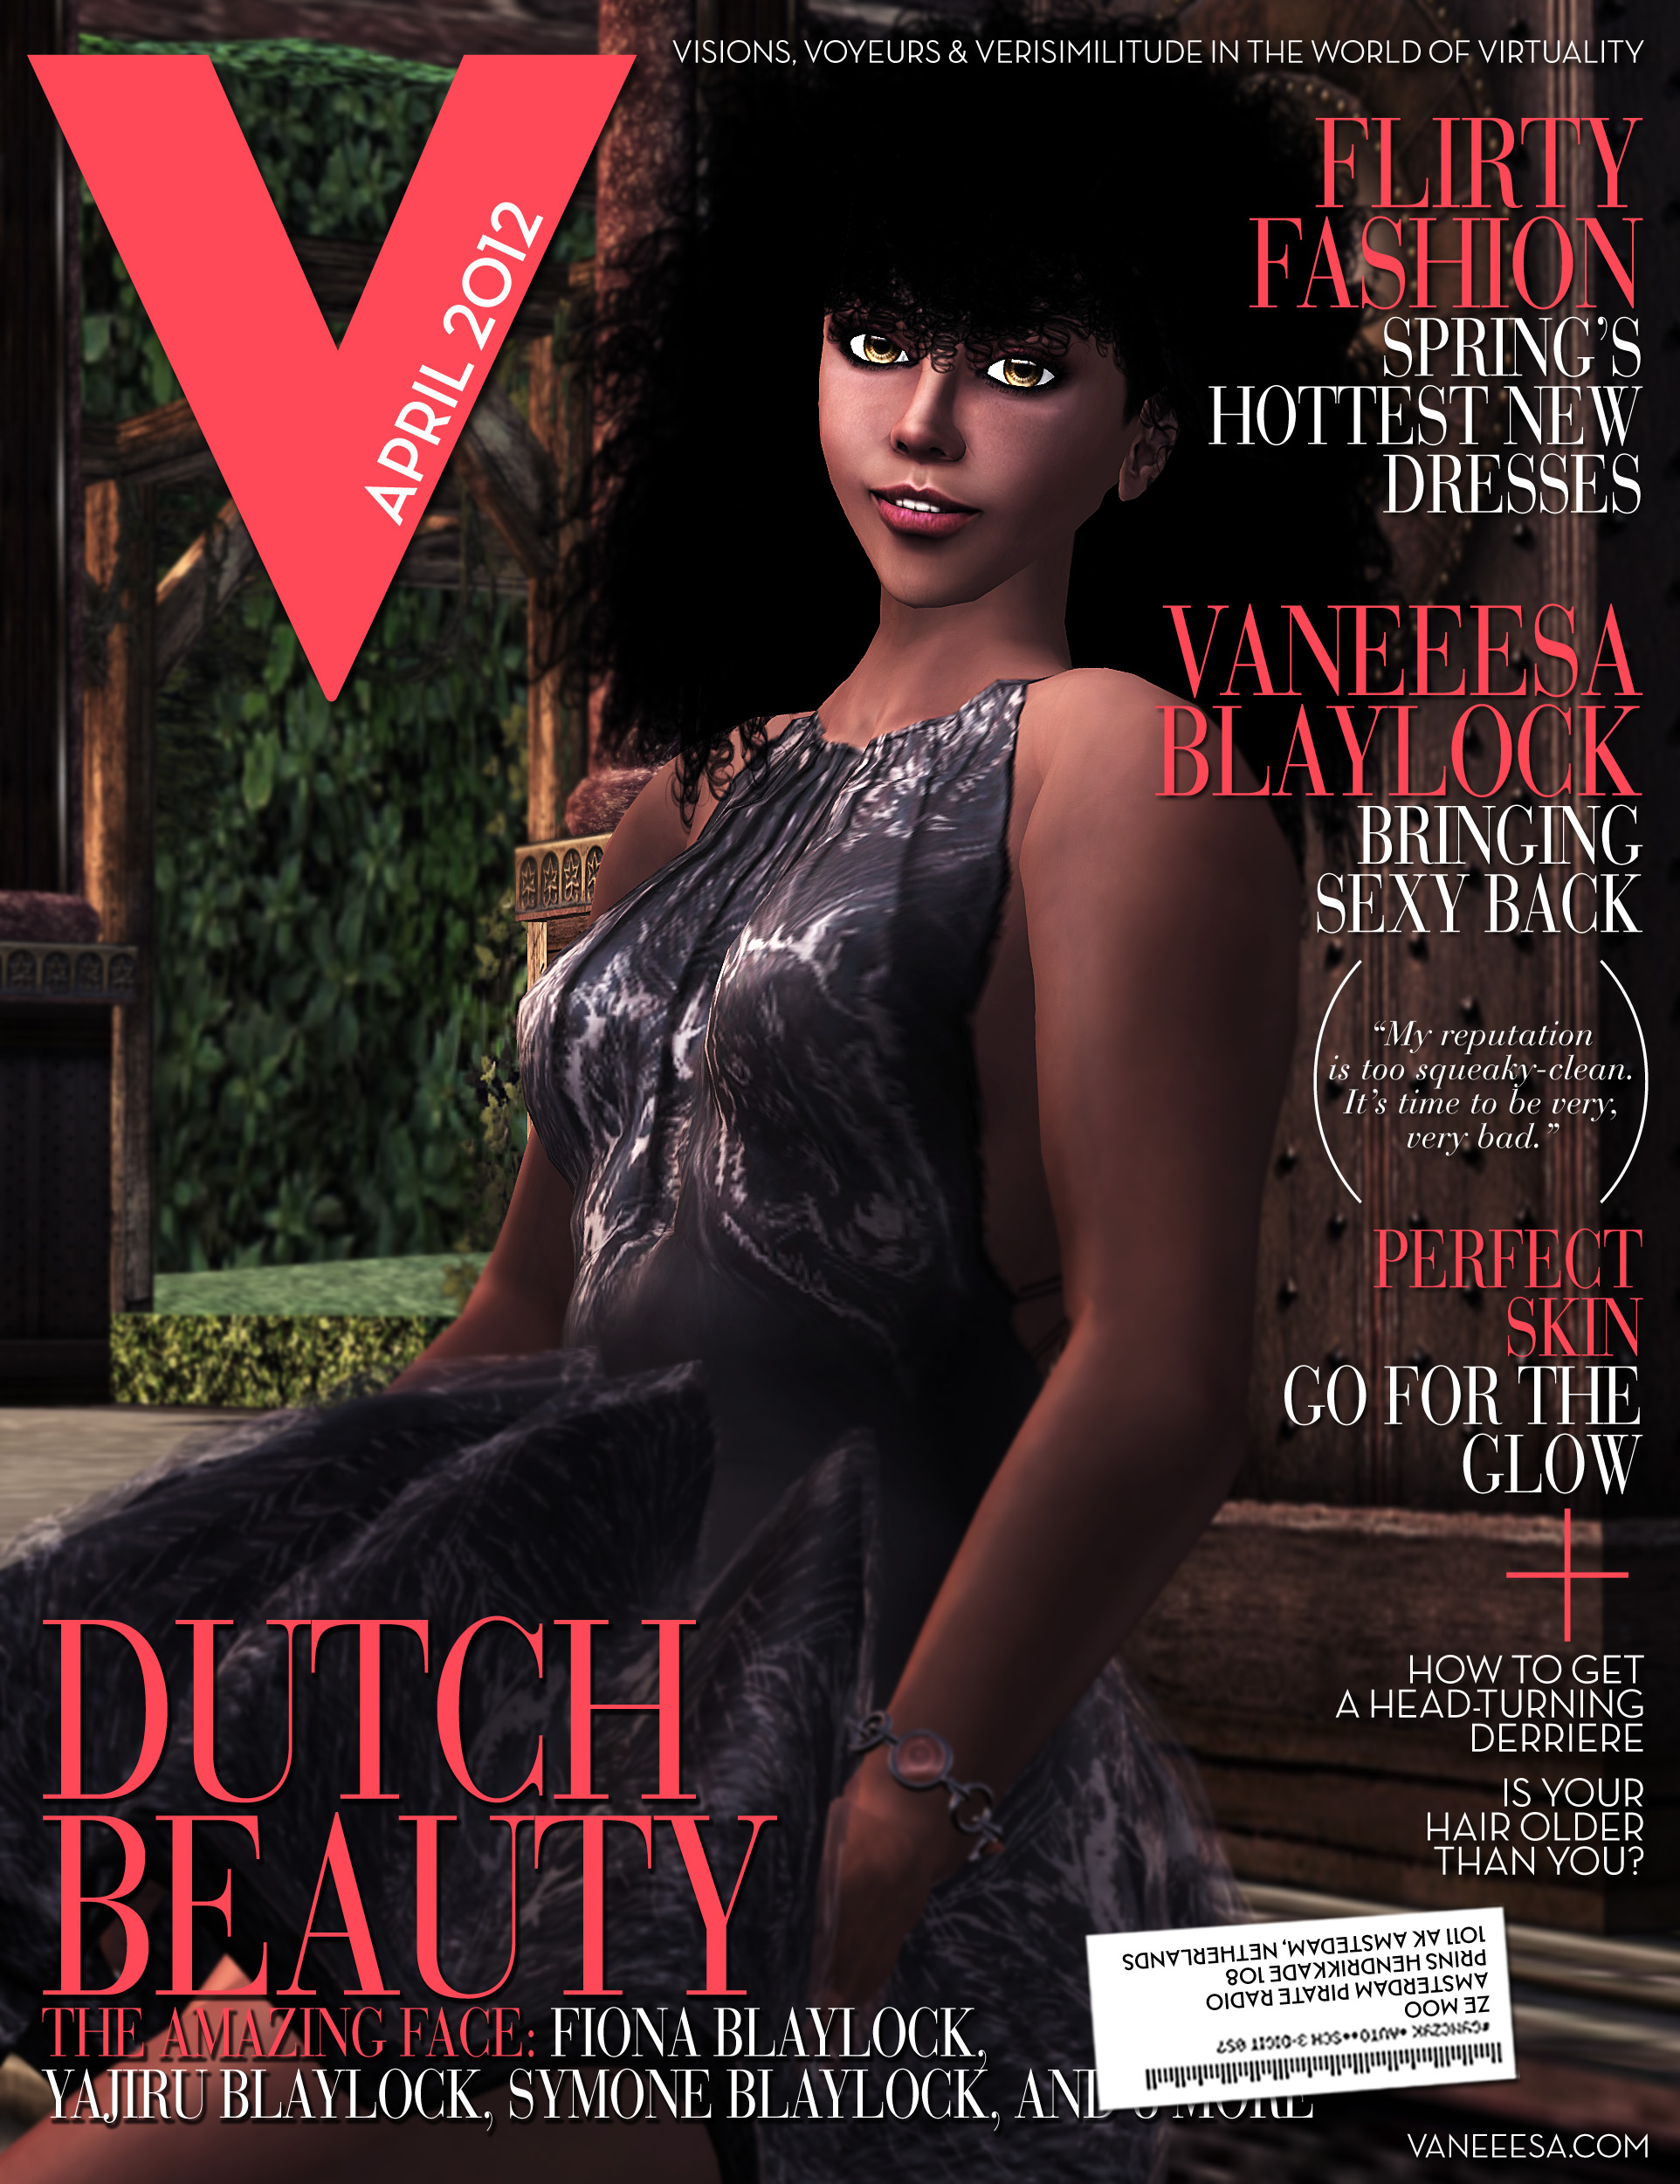 Cover image of Vaneeesa Blaylock in a black dress sitting against a post in a garden like setting